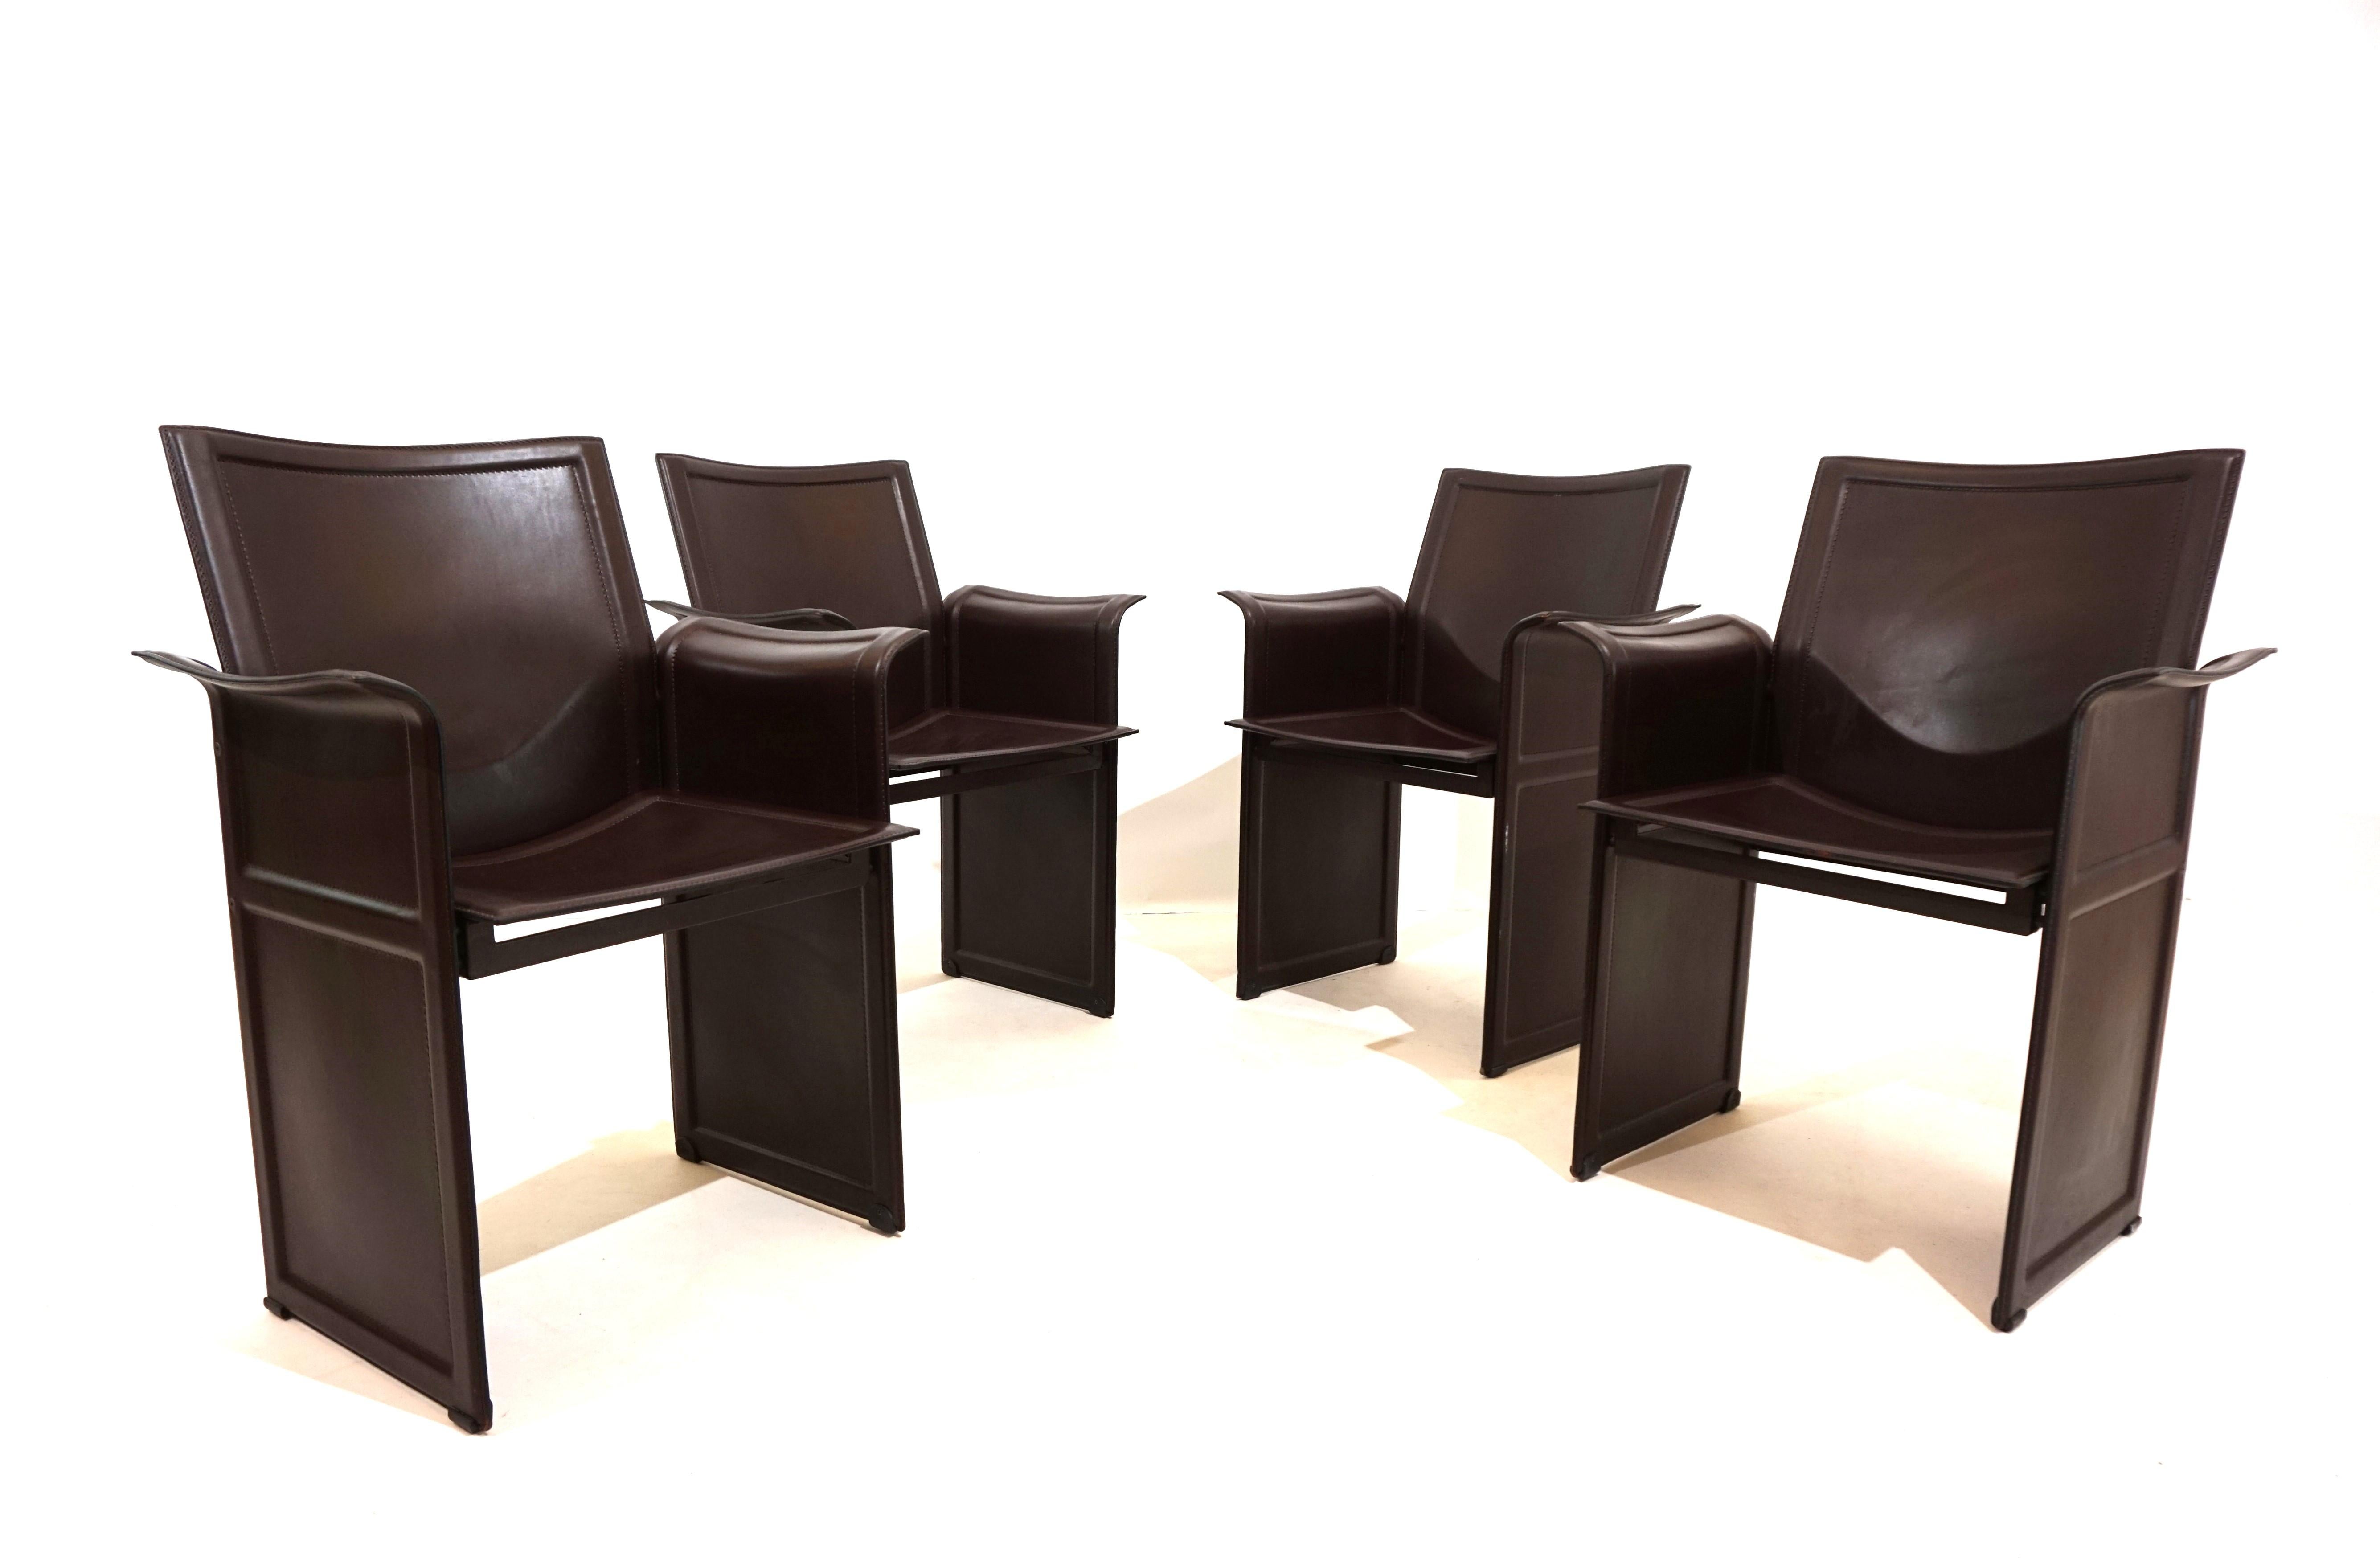 The set of 4 Matteo Grassi dining chairs made of thick brown saddle leather in typical Italian leather art.  The chairs come in an excellent,  Almost new, condition. The seats and backrests show almost signs of wear, and the floor area also has no